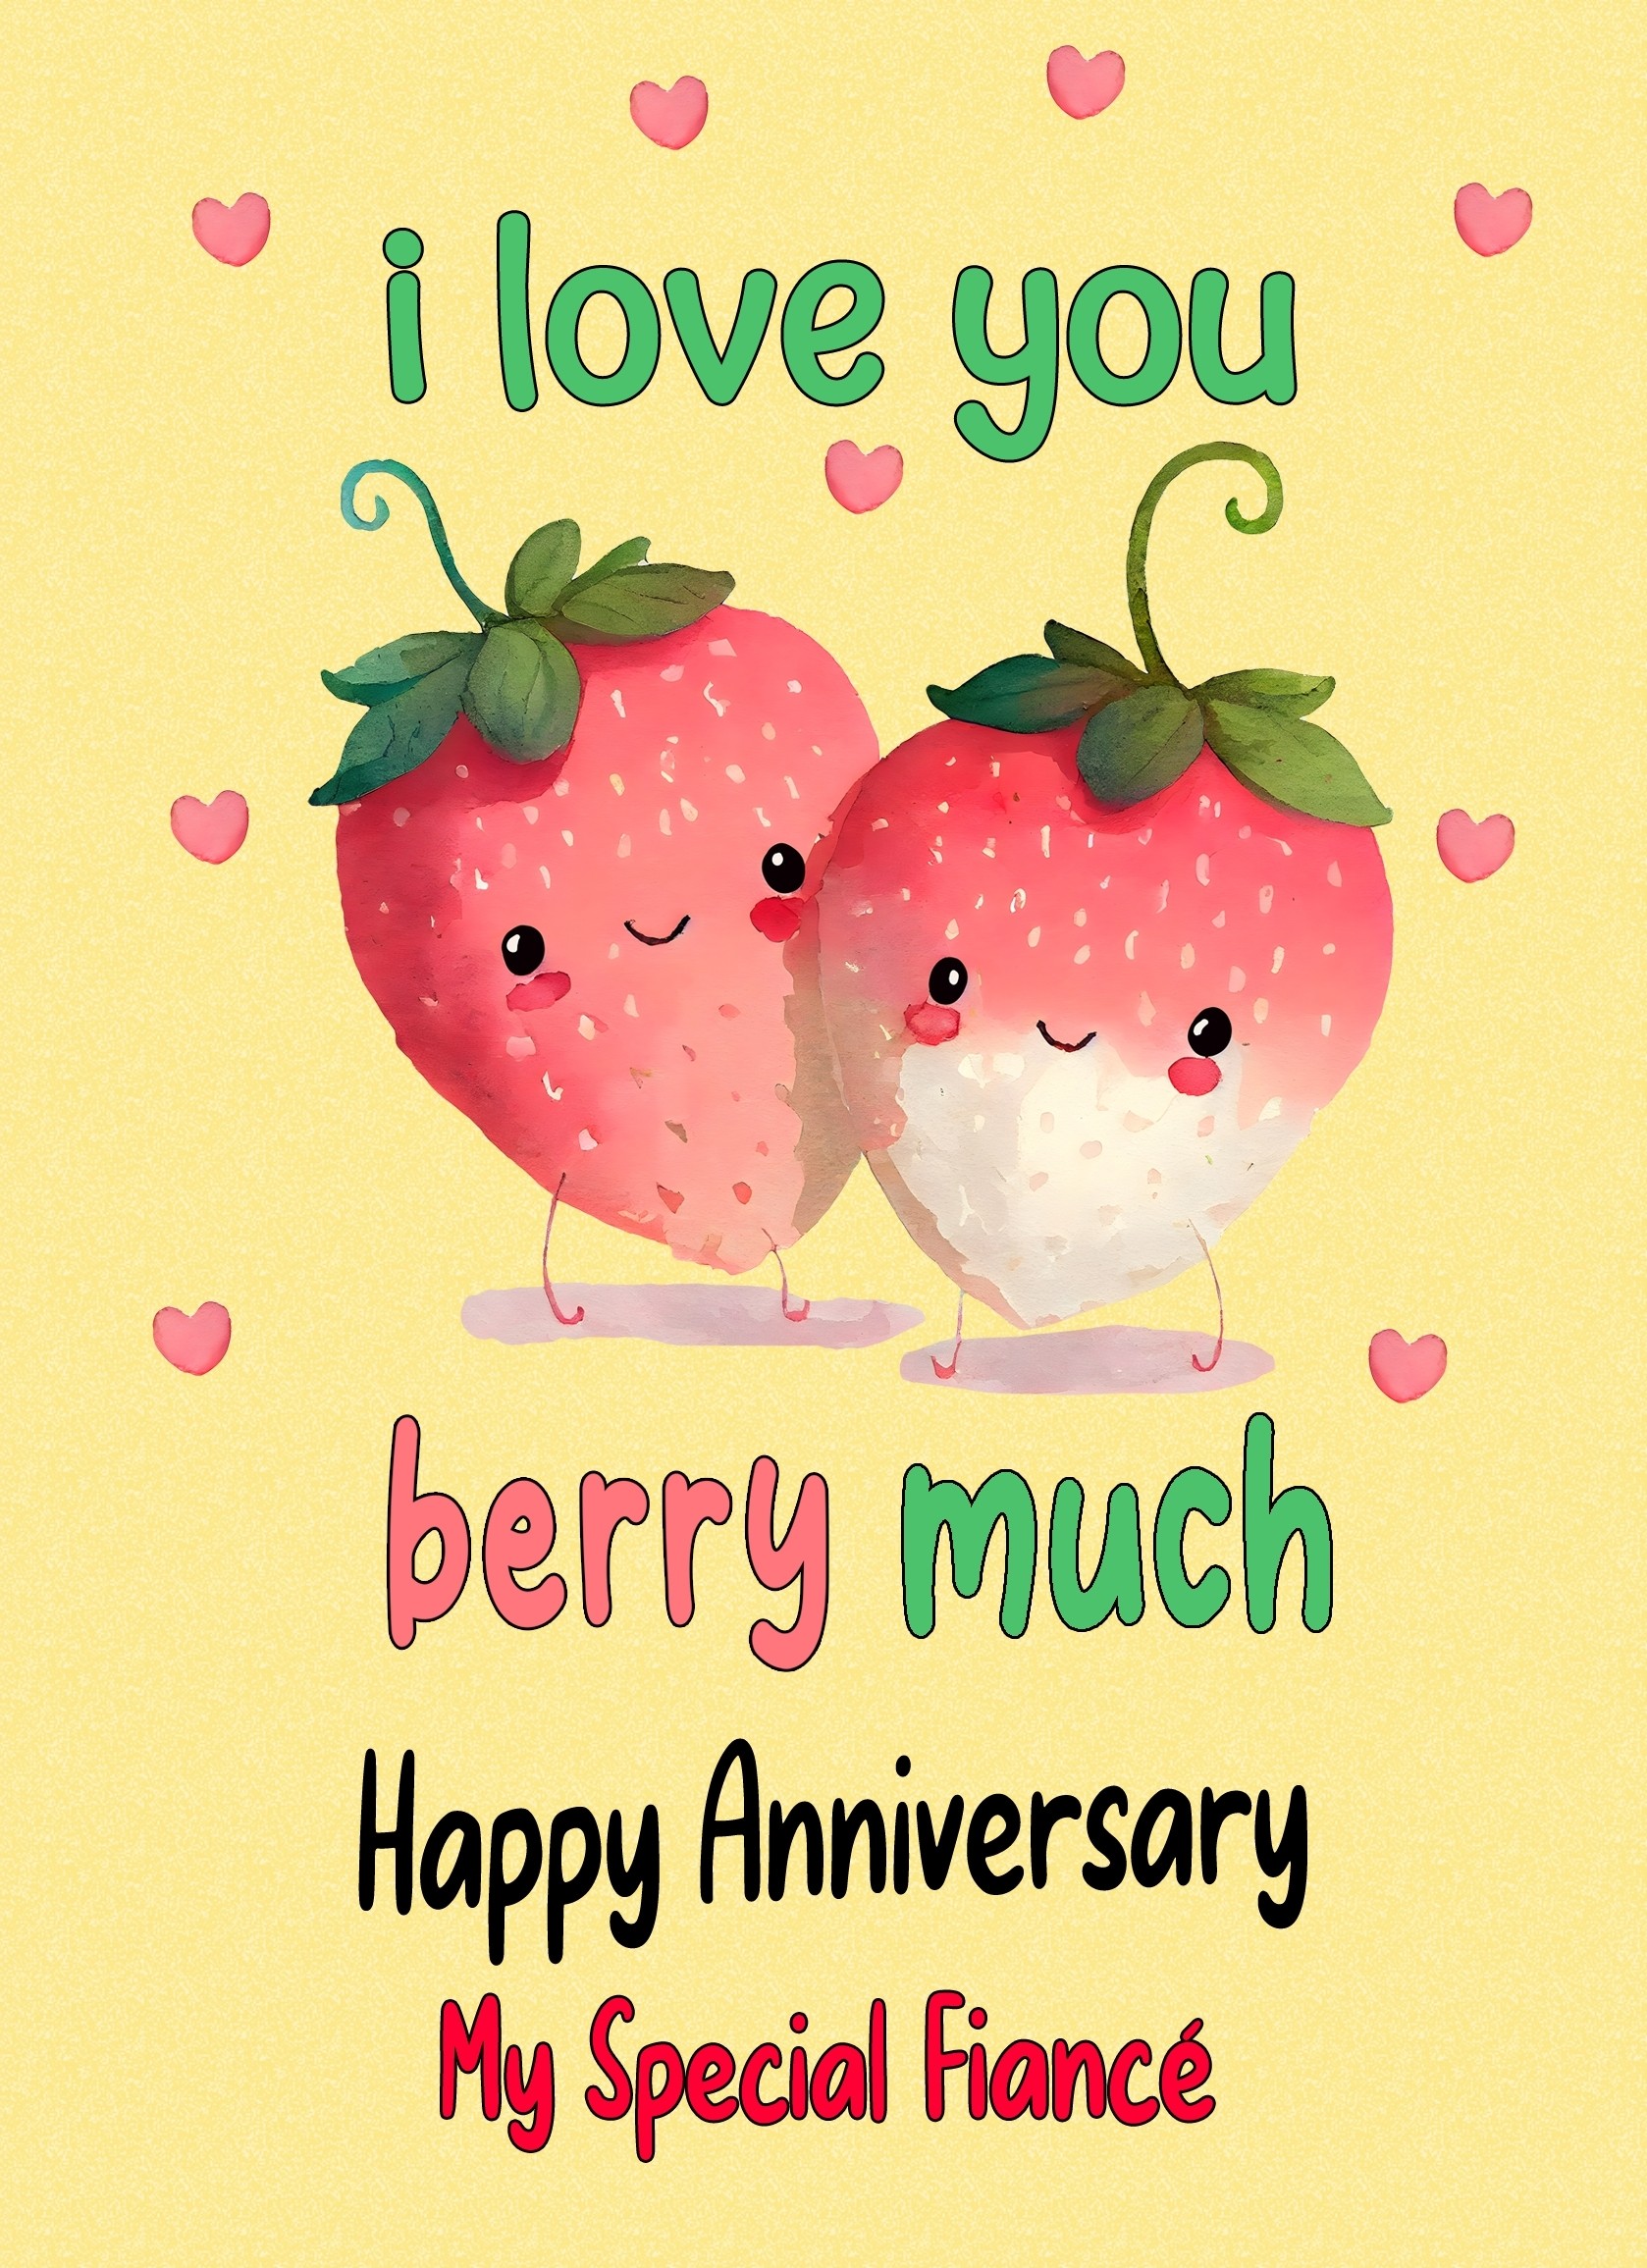 Funny Pun Romantic Anniversary Card for Fiance (Berry Much)